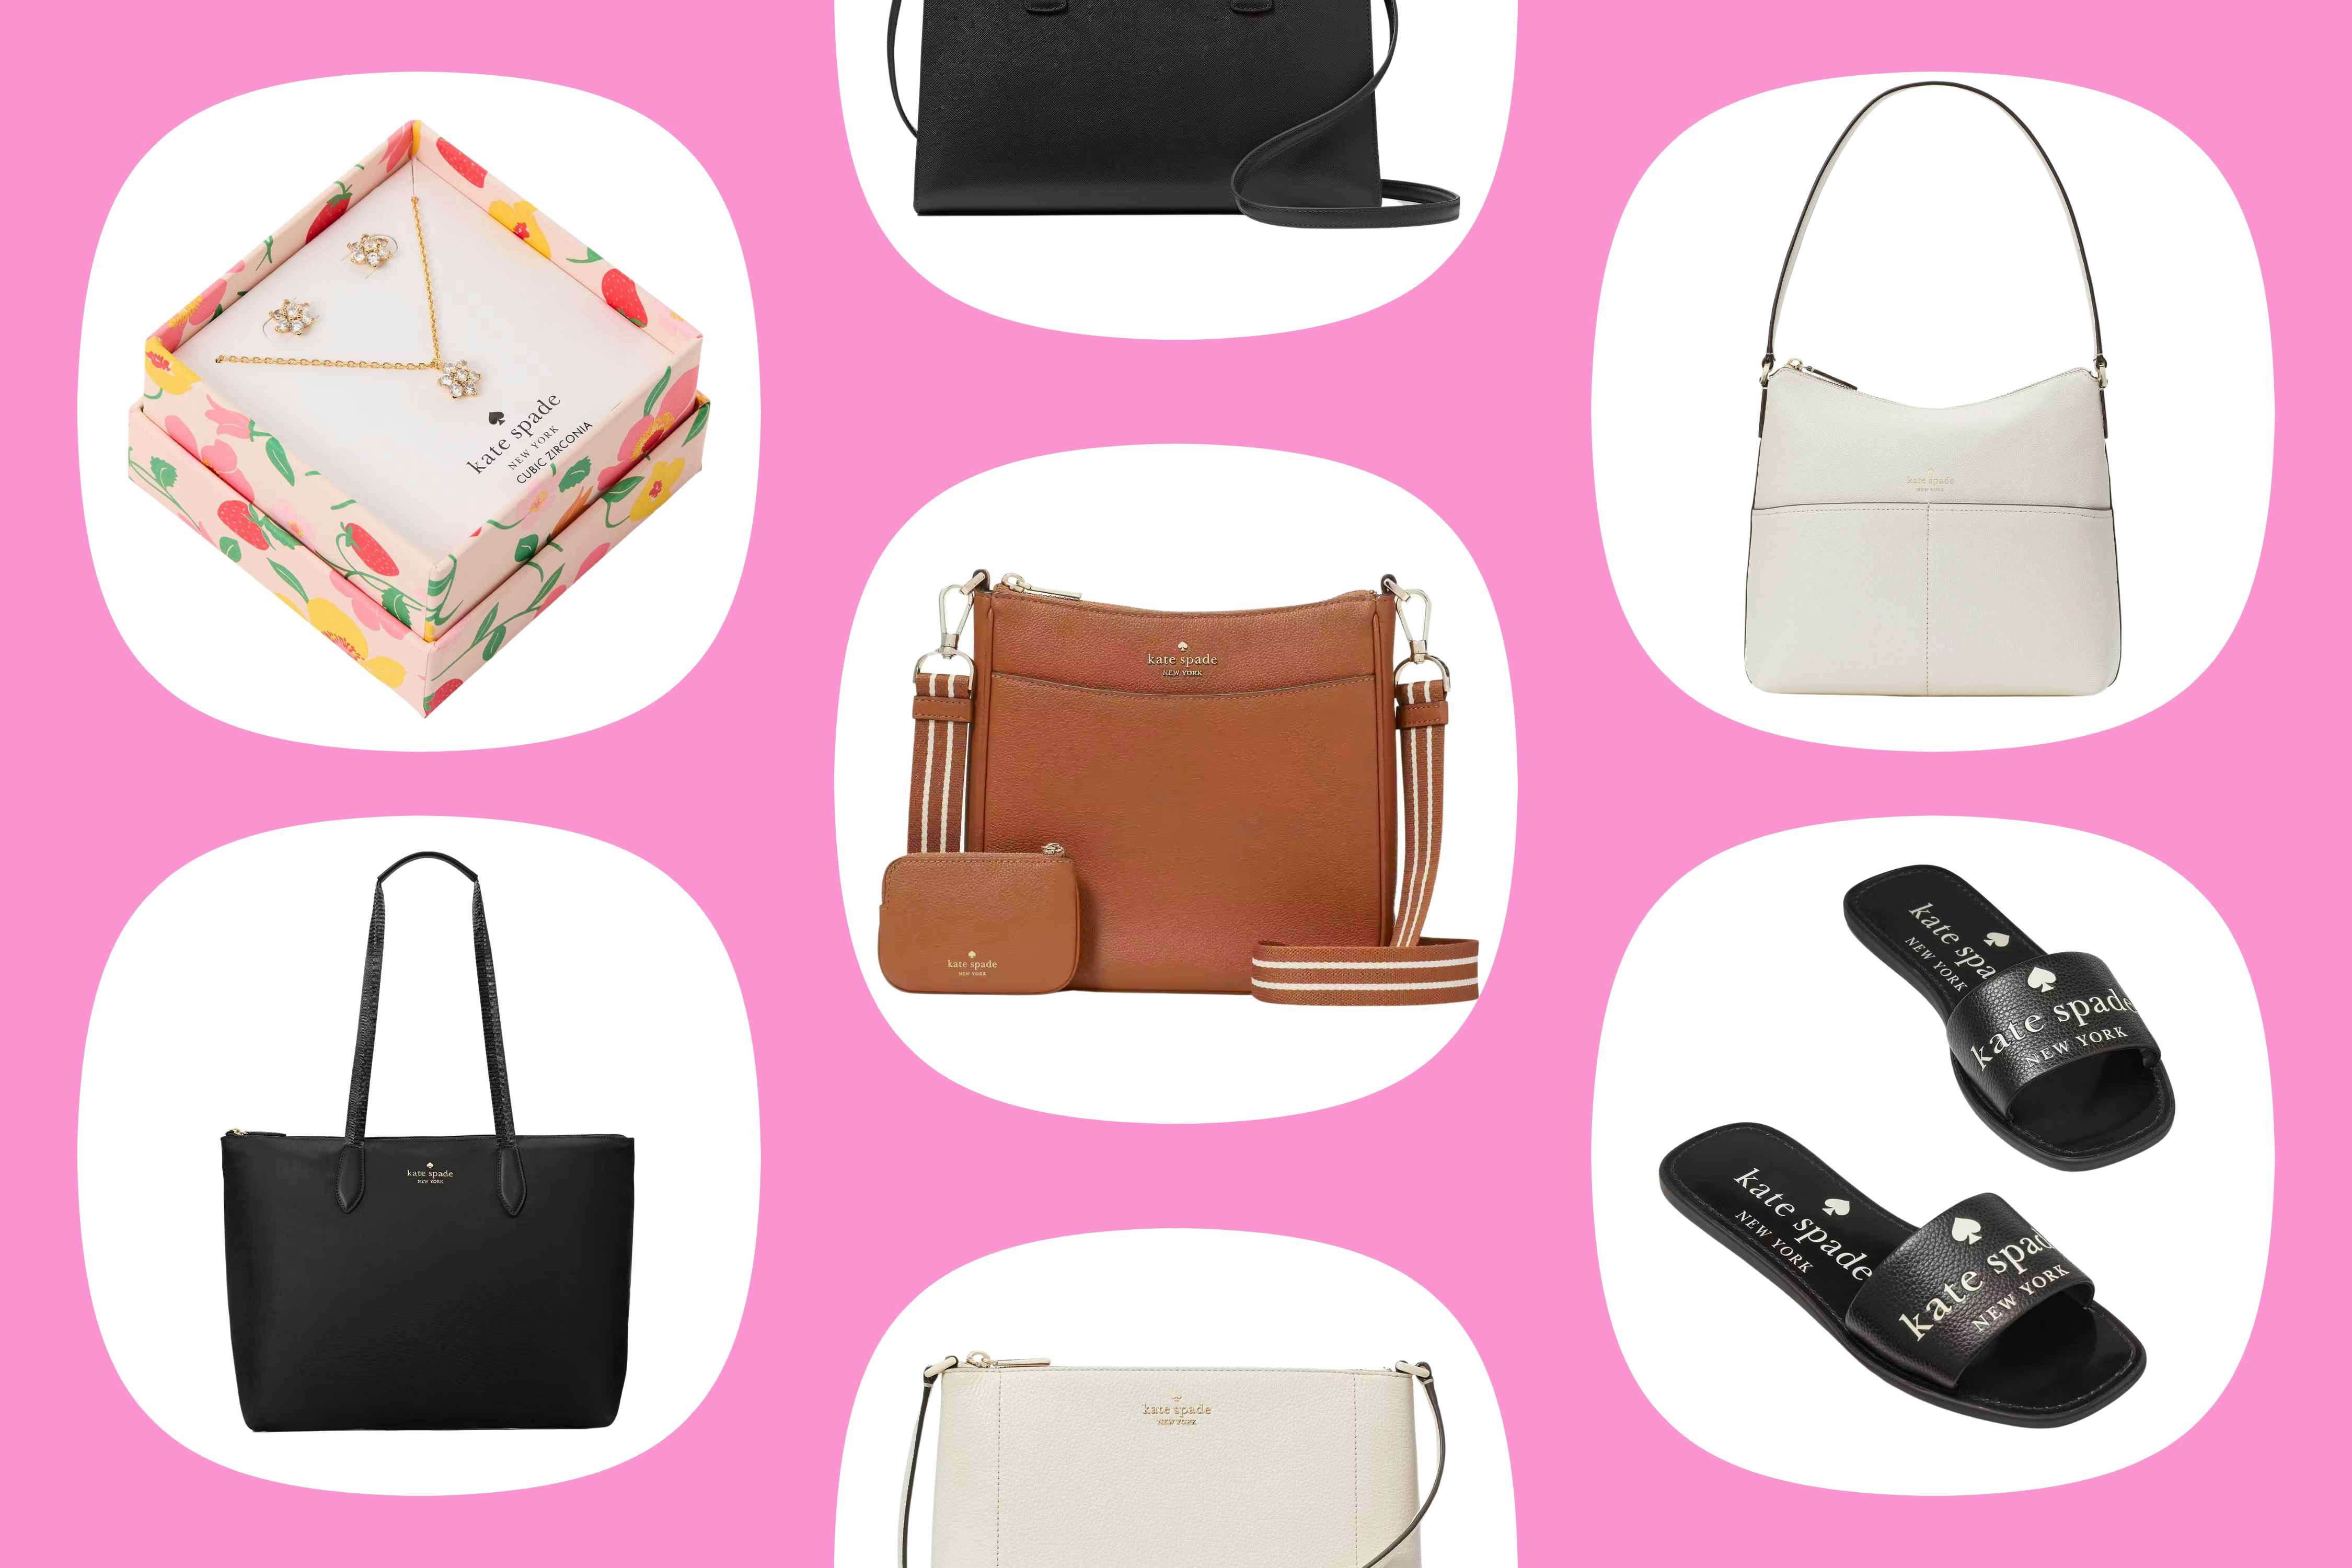 Kate Spade Sale: $28 Card Holder, $55 Leather Sandals, and $71 Tote